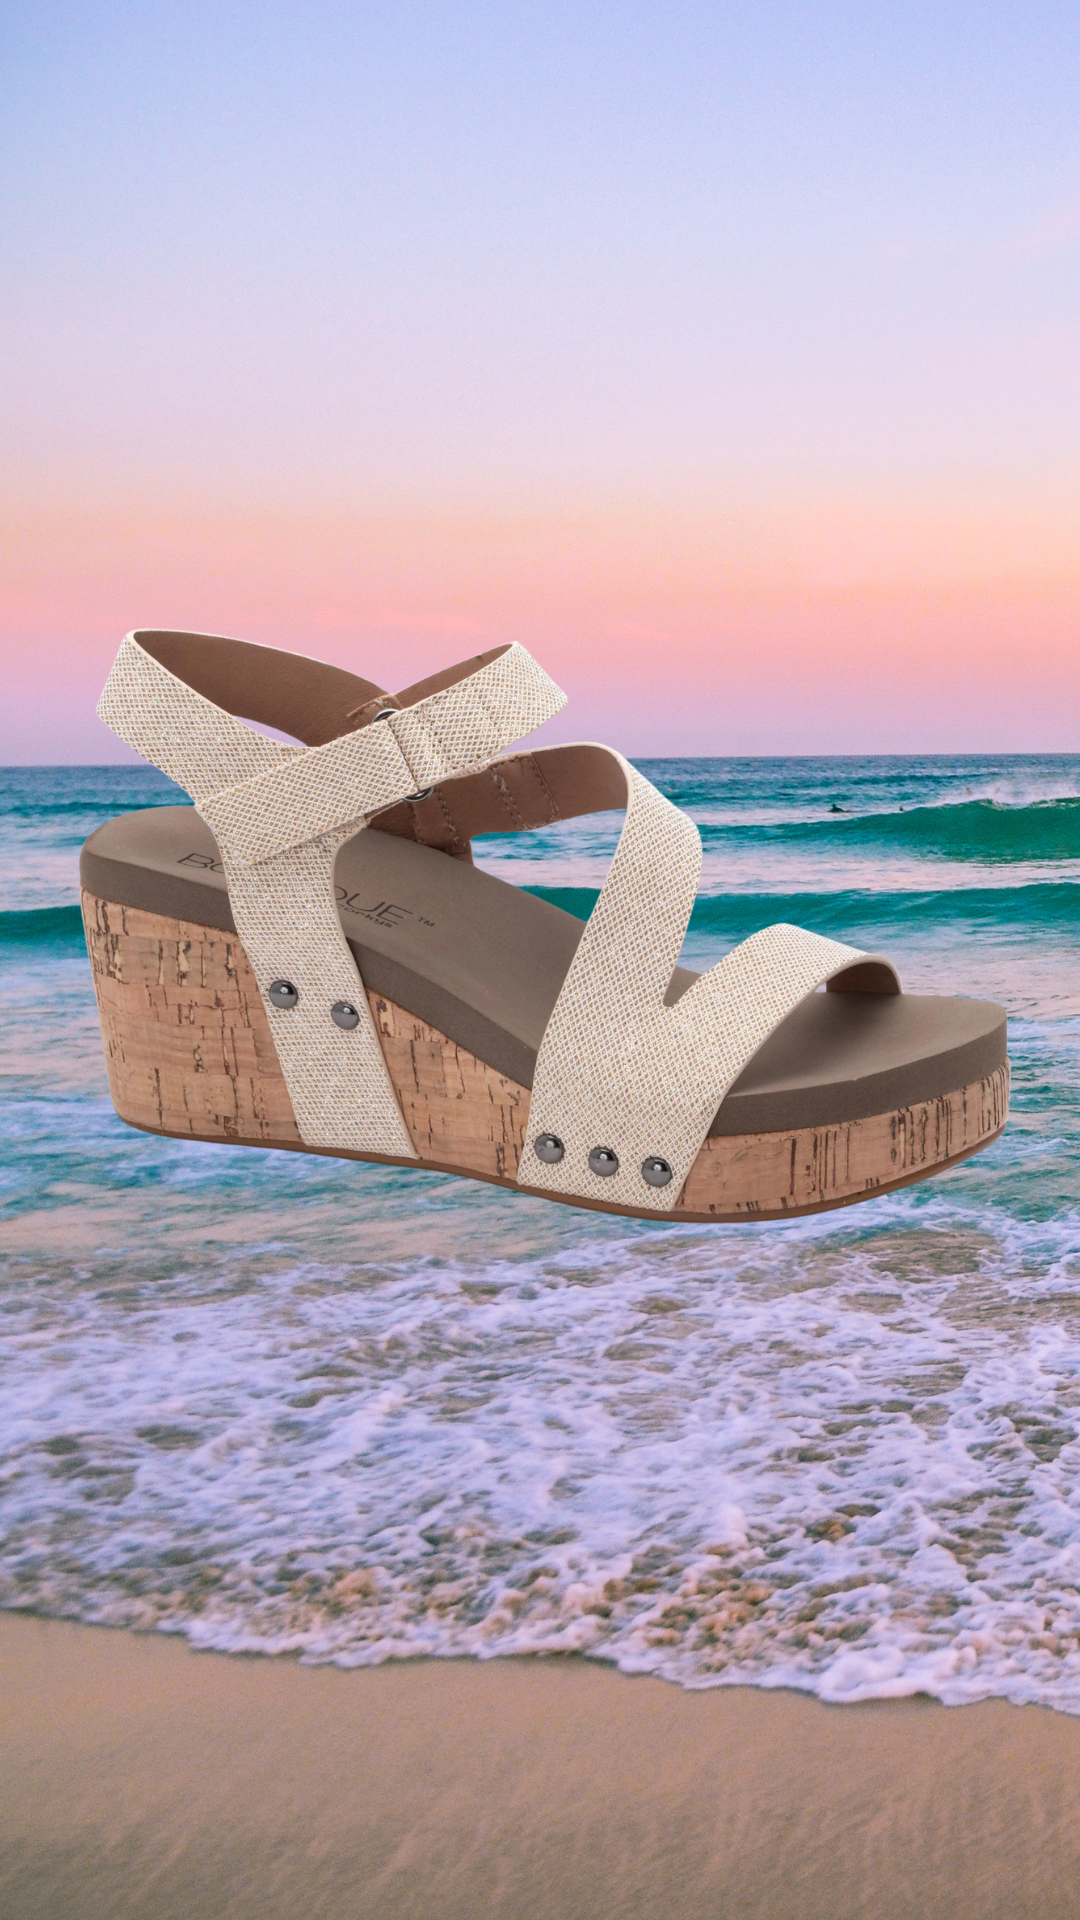 Spring Fling Wedge by Corky’s